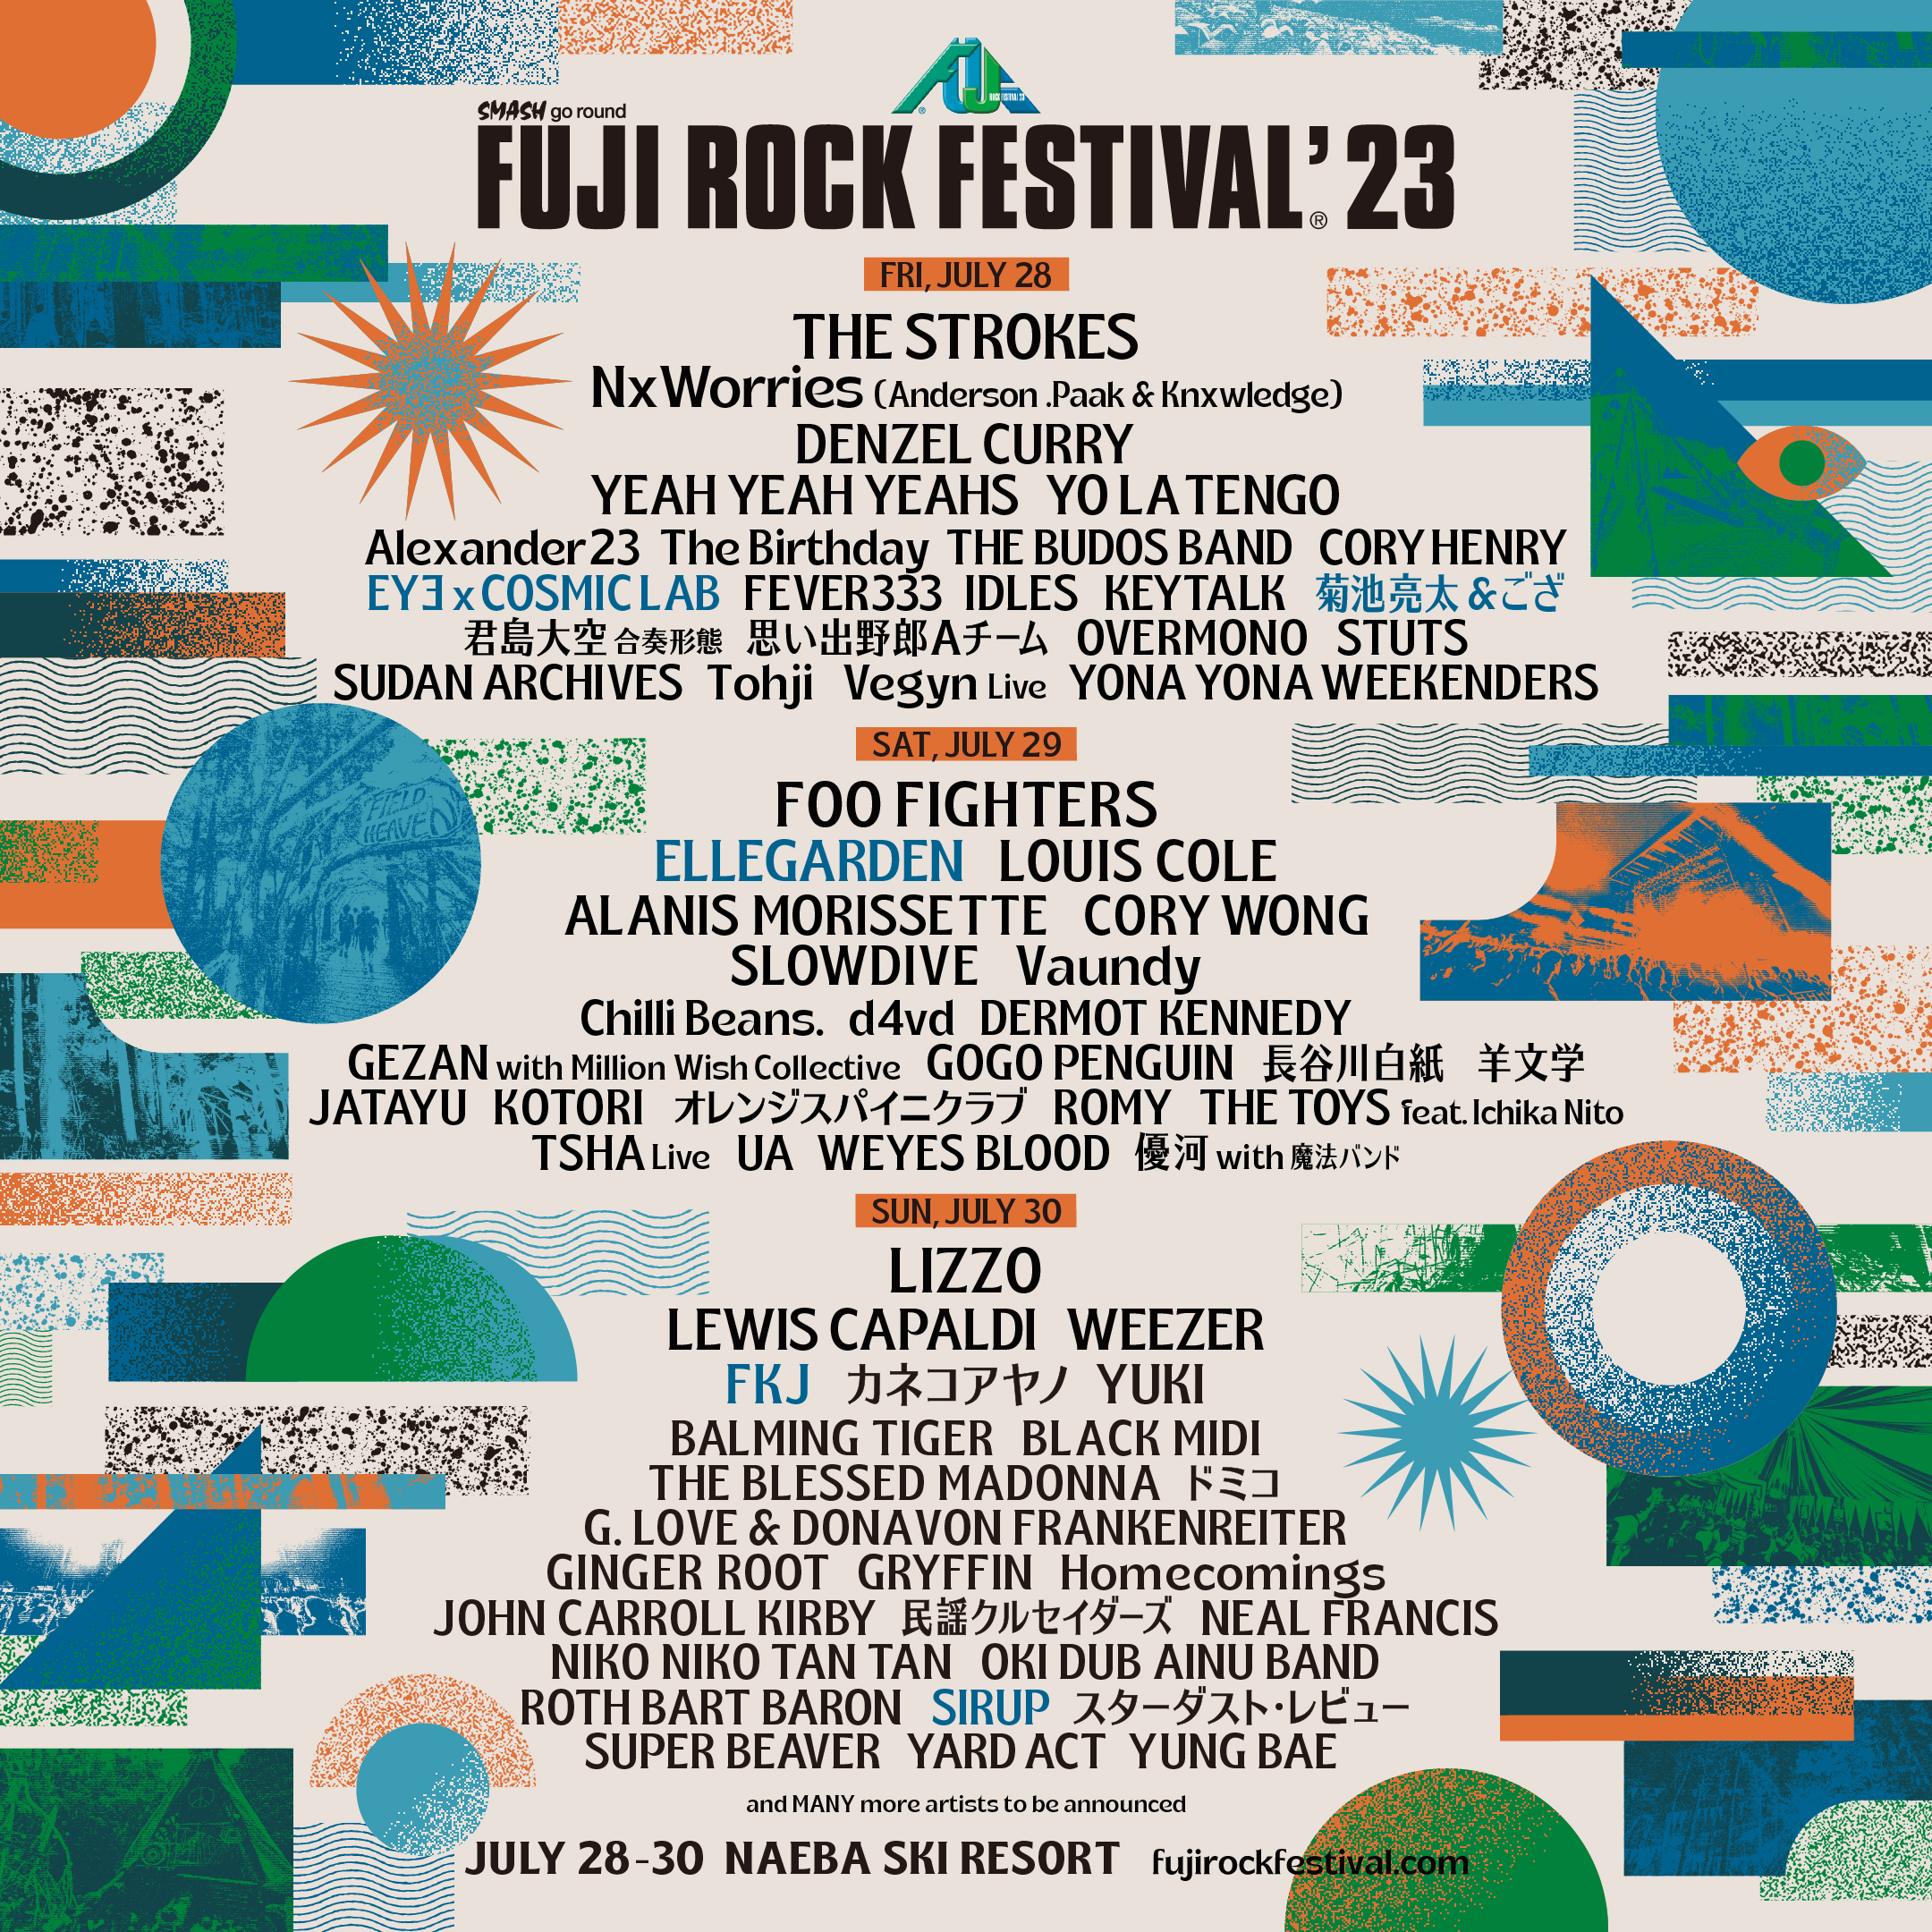 FUJI ROCK FESTIVAL'23 出演決定！ - SIRUP Official Site